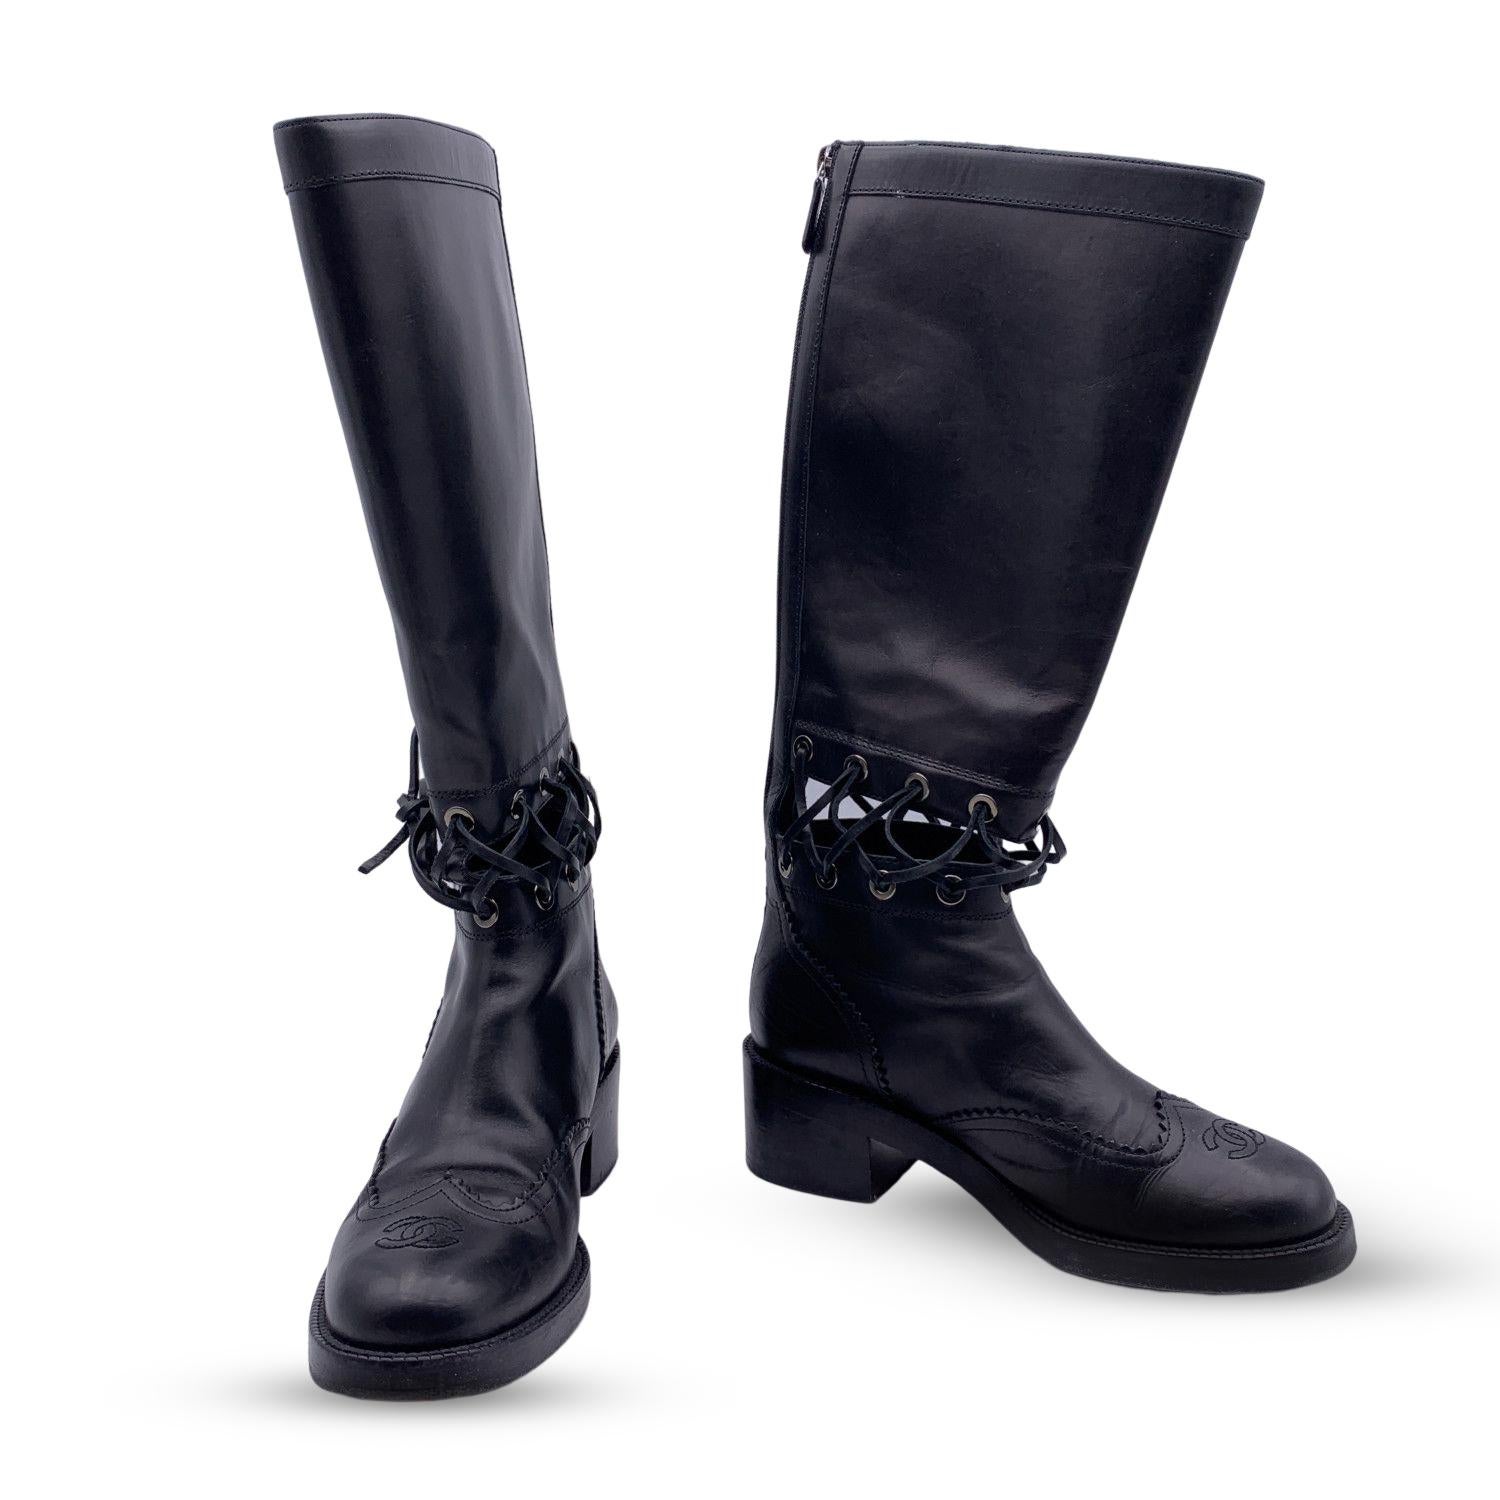 Chanel black leather Lace-Up Cutout Knee-High Boots. Crafted in black leather with cut out details. They feature round toe, CC - logo on toes rear zip closure. Low heels Leather sole. Heels Height: 2 inches - 5.1 cm. Calf circumference: 13.75 inches